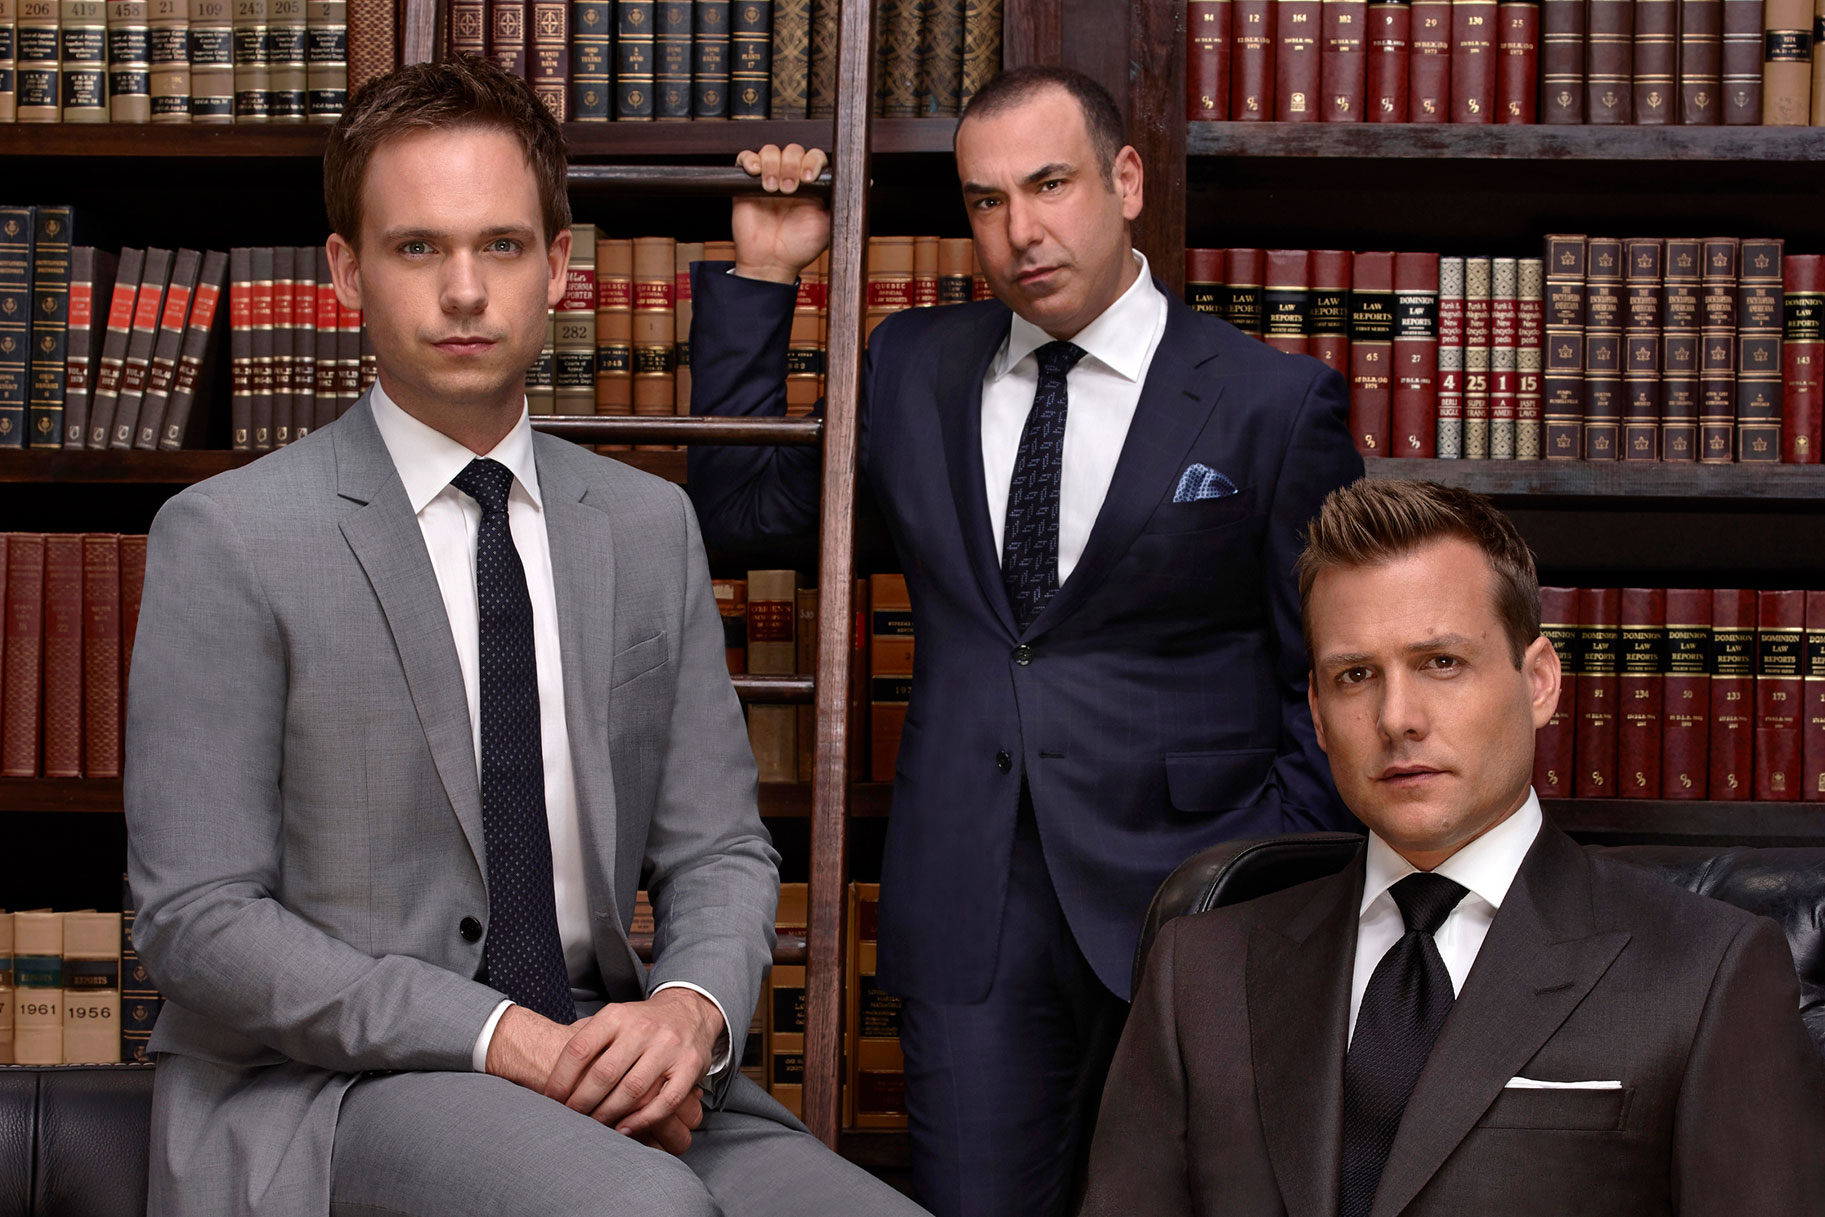 Where Was 'Suits' Filmed?